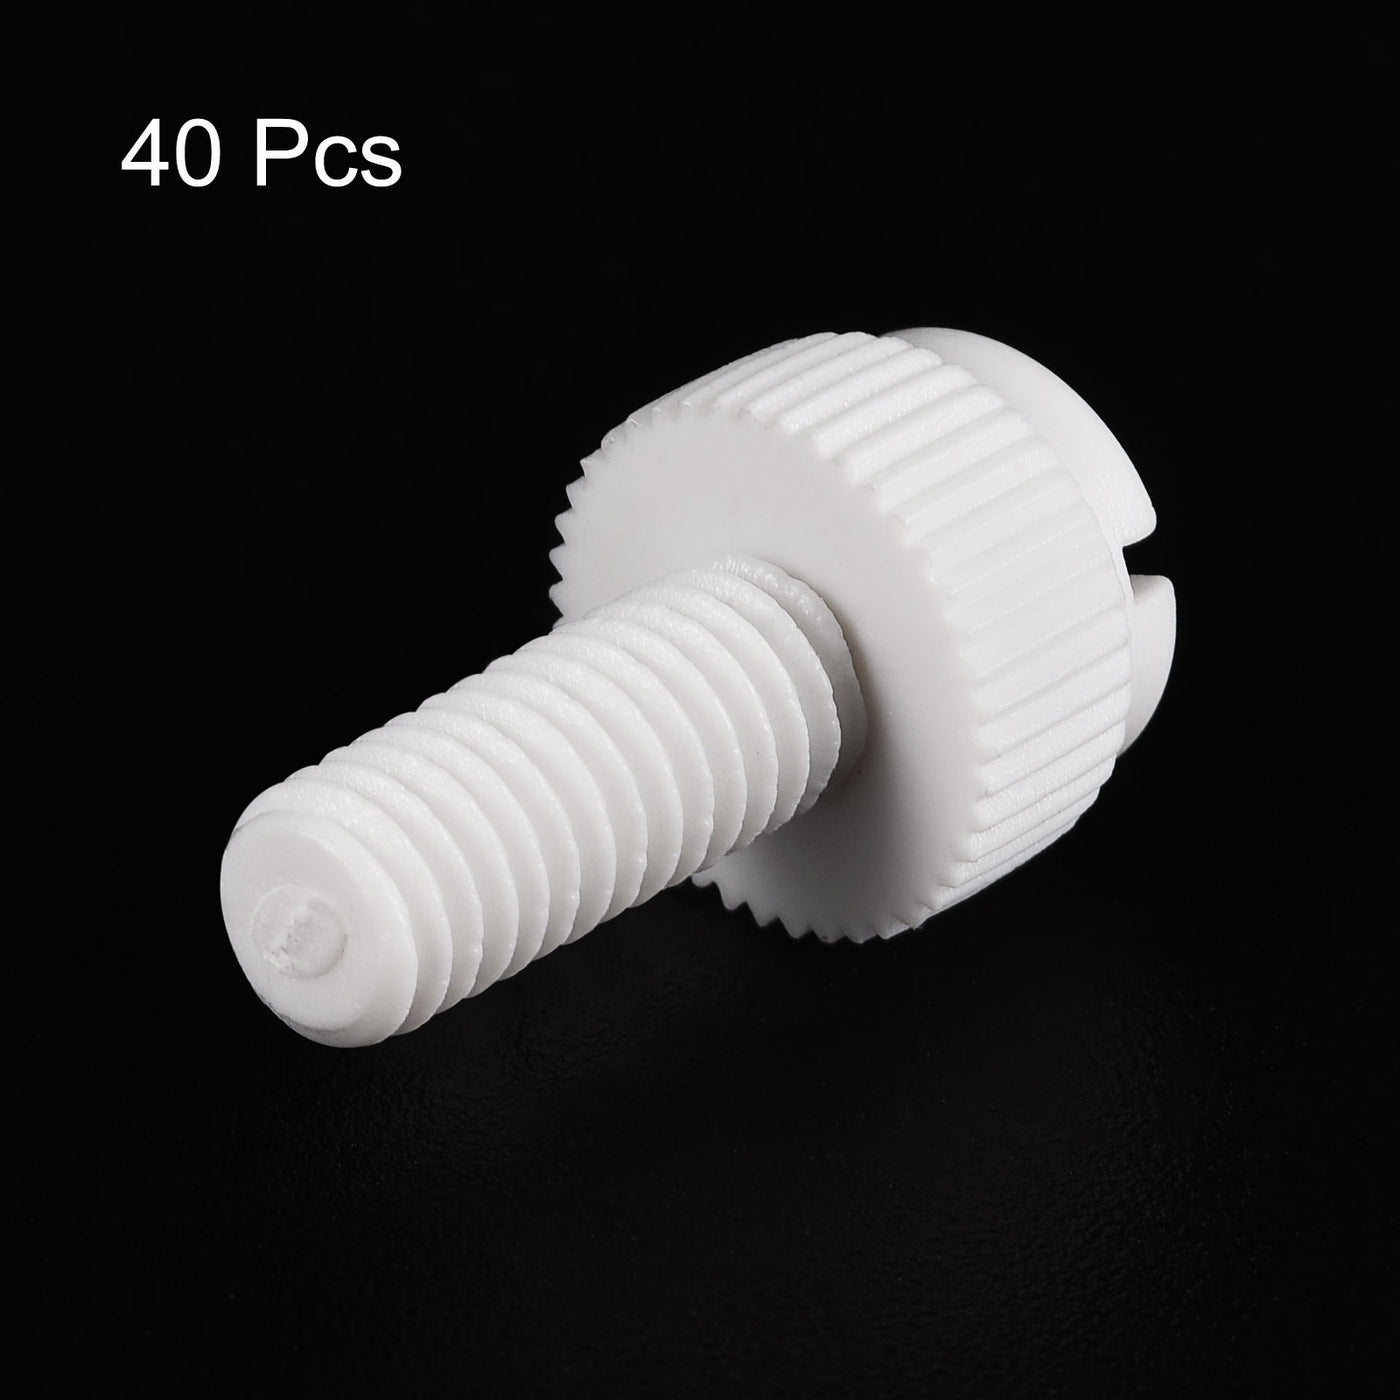 Uxcell Uxcell Plastic Machine Screws, M8x16mm PP Slotted Knurled Fasteners Bolts for Electronics, Communications, White, 40Pcs